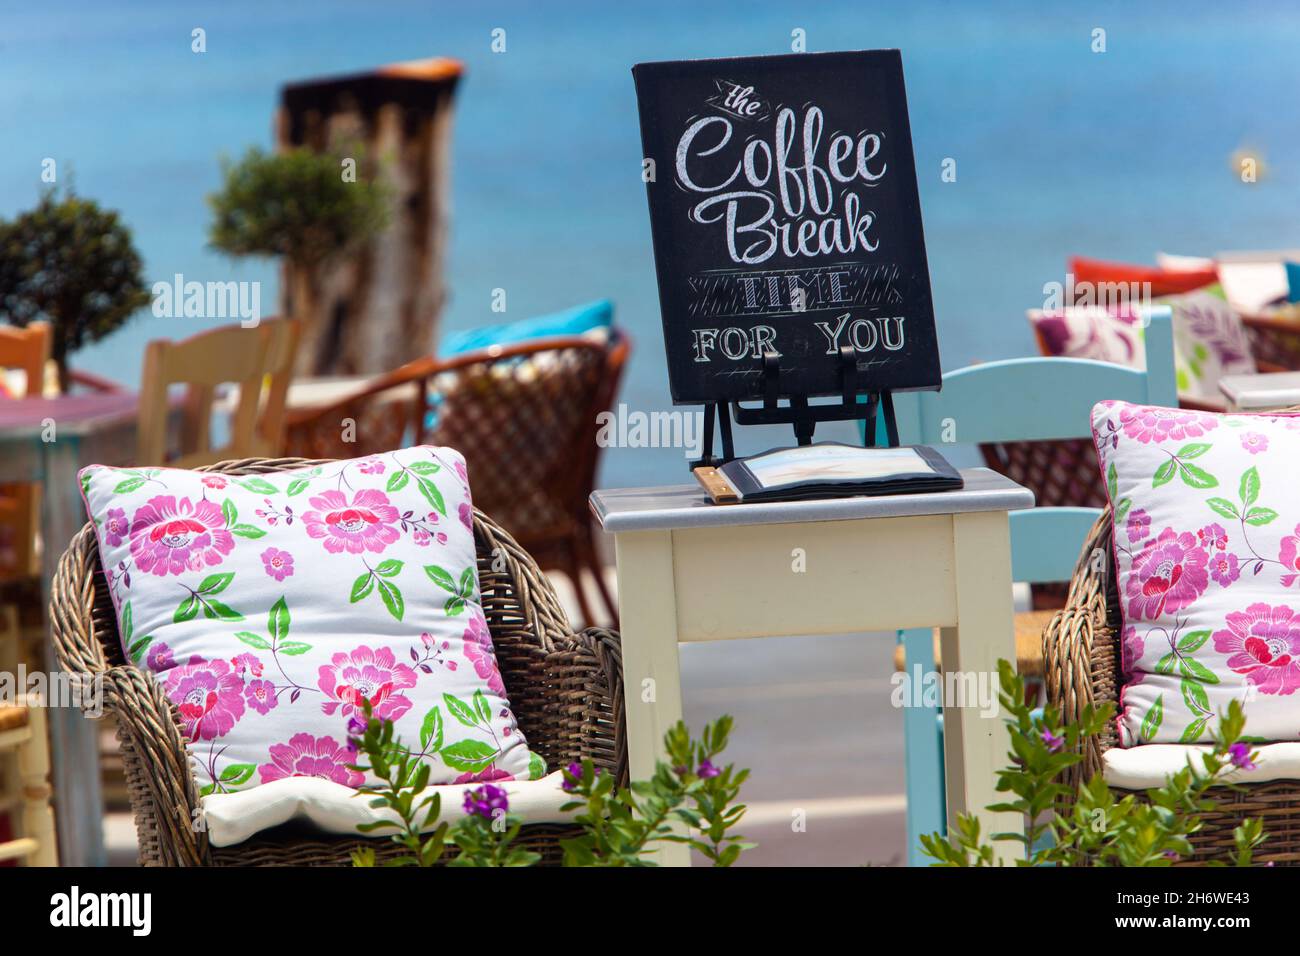 The Coffee Break Time for You Greece restaurant at sea well being outside Stock Photo